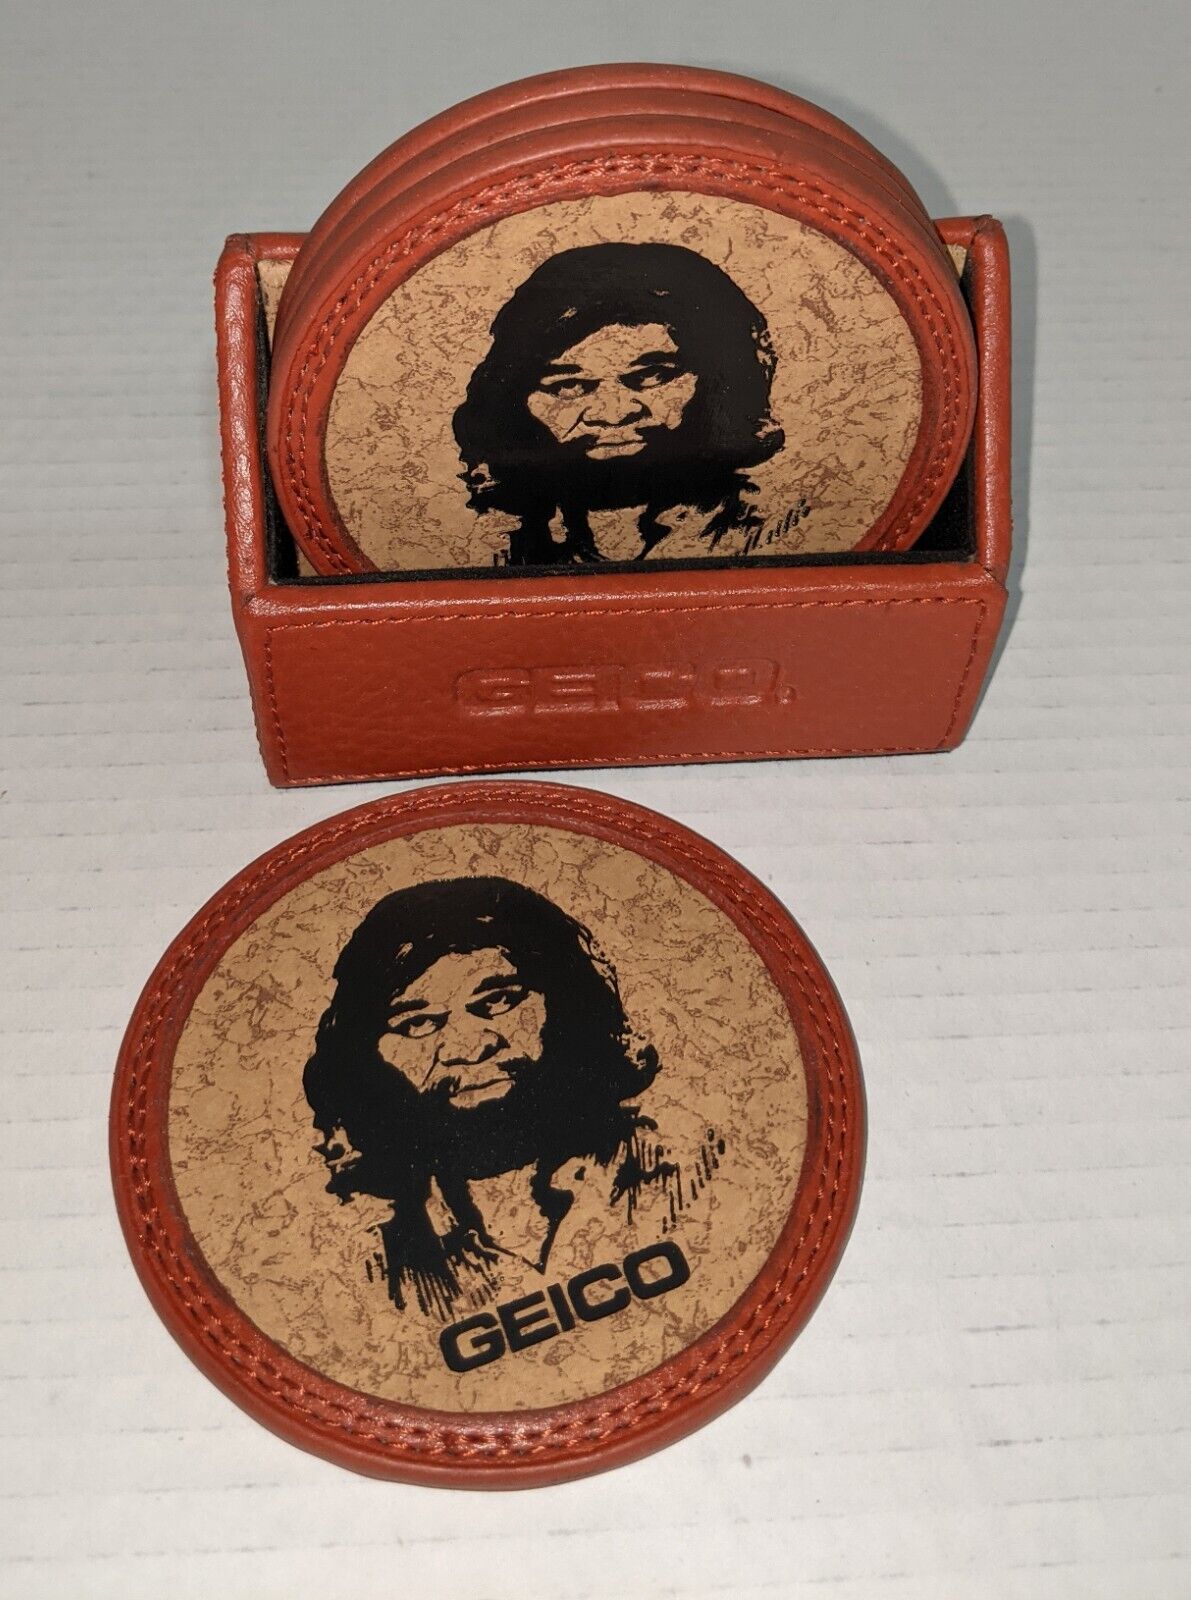 Collectible Set 4 GEICO CAVEMAN Drink Coasters Faux Leather/Cork Fun 4 Man Cave